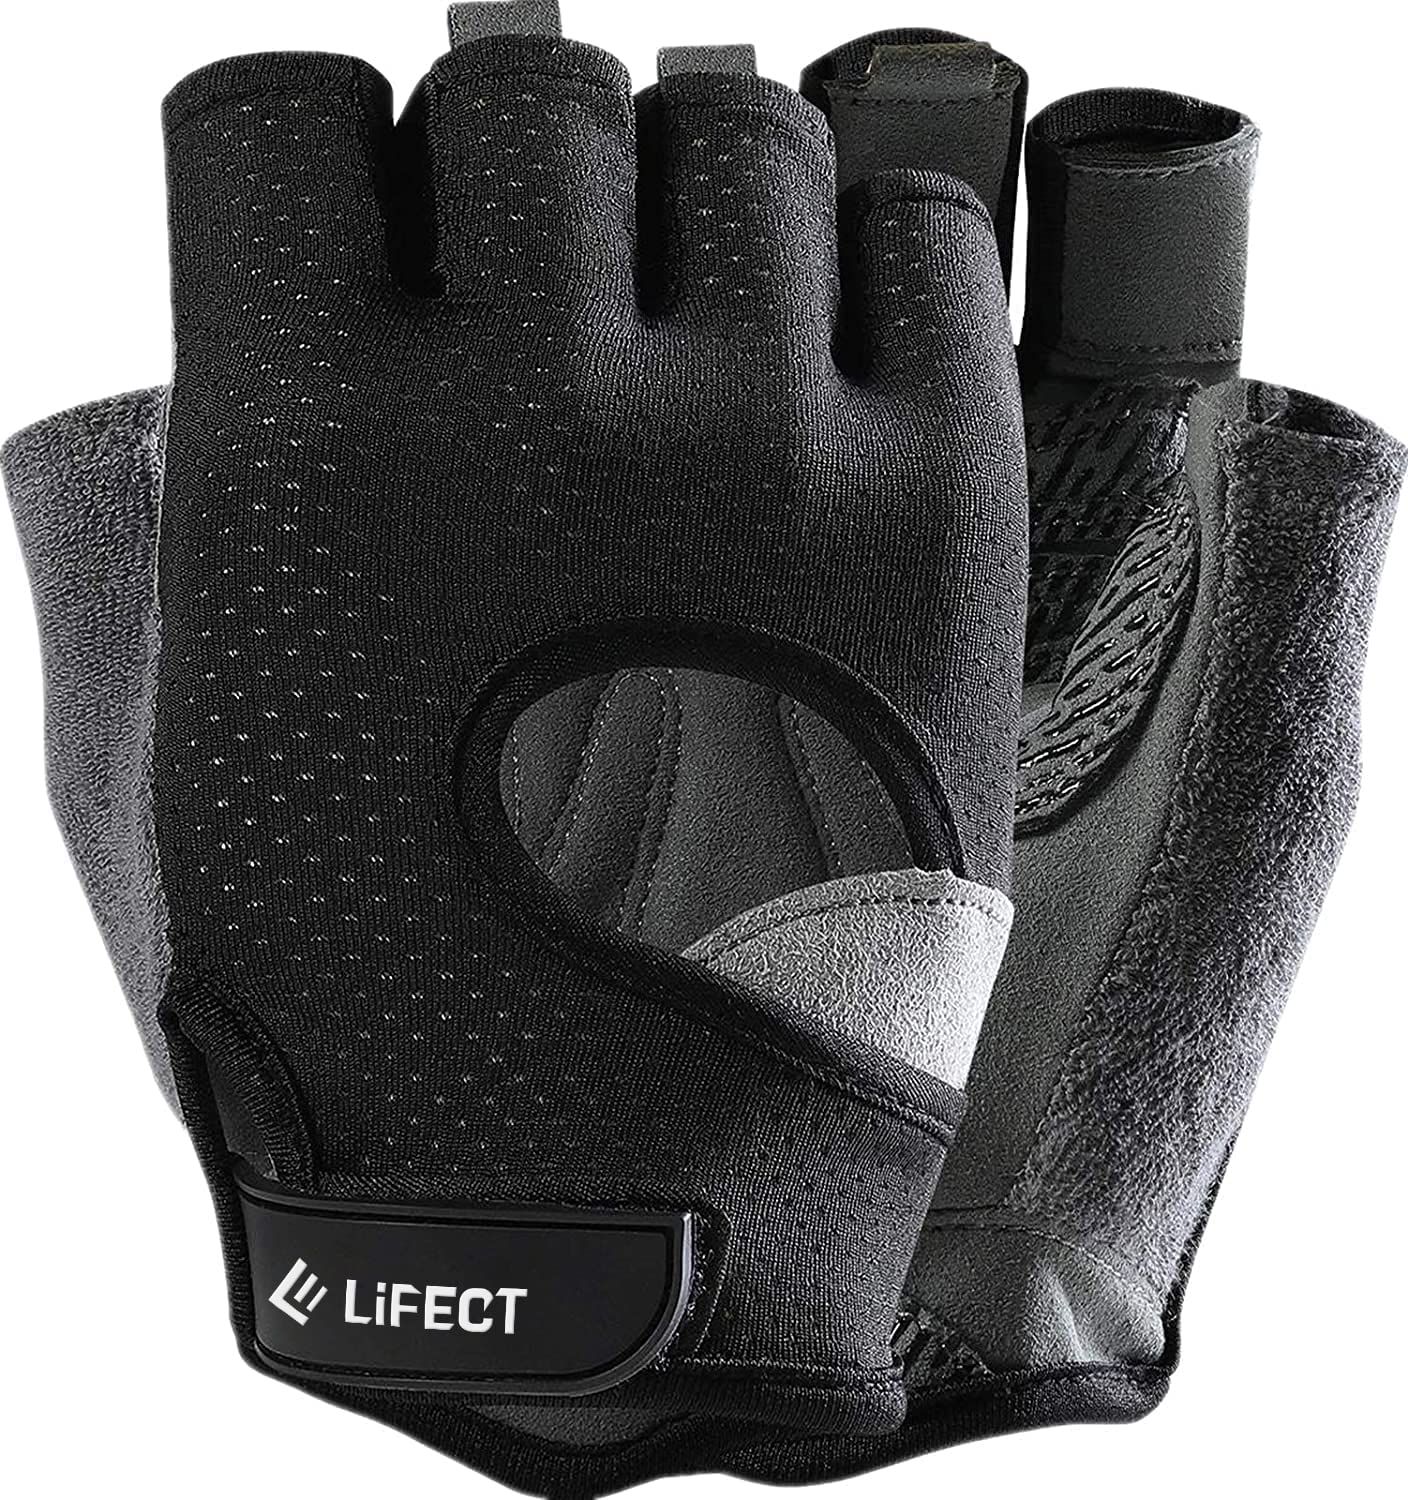 LIFECT Freedom Workout Gloves for Women and Men – Lifectus